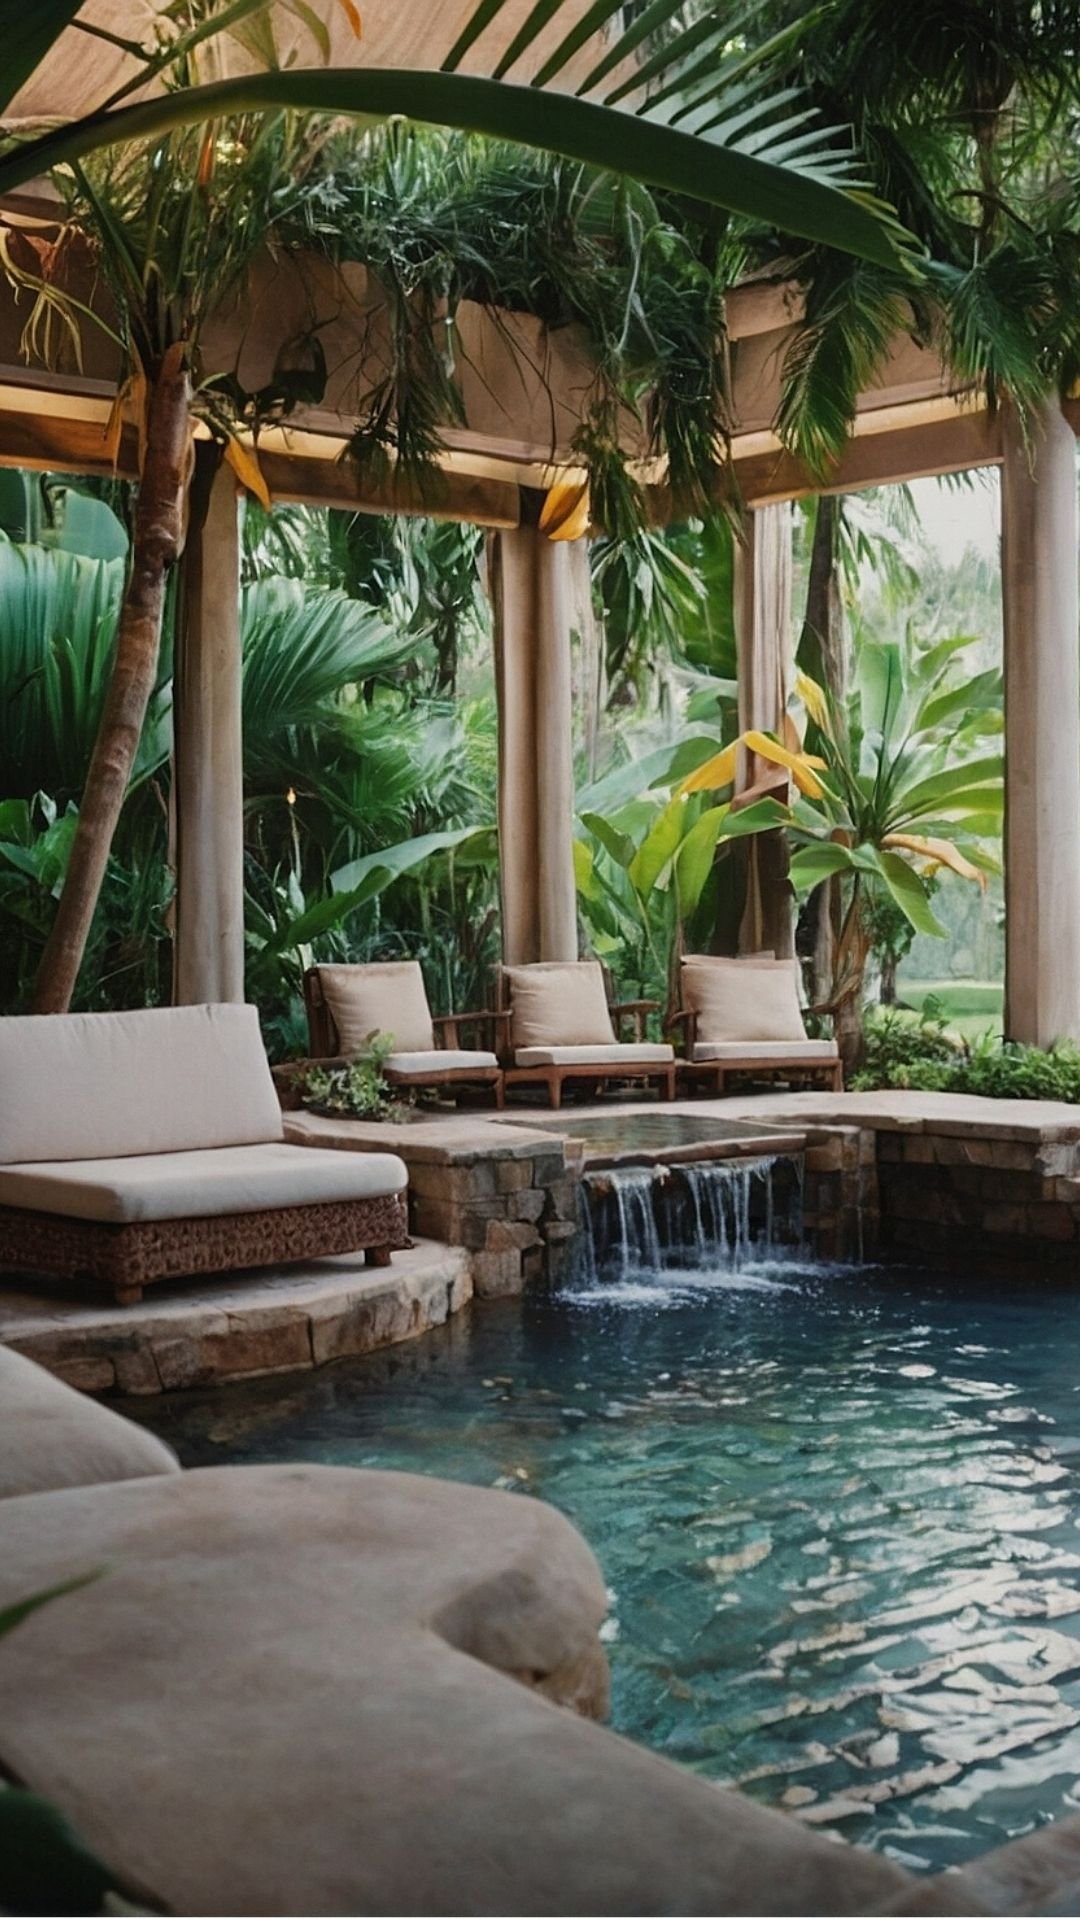 Tranquil Waters: Luxurious Tropical Poolside Lounging Area